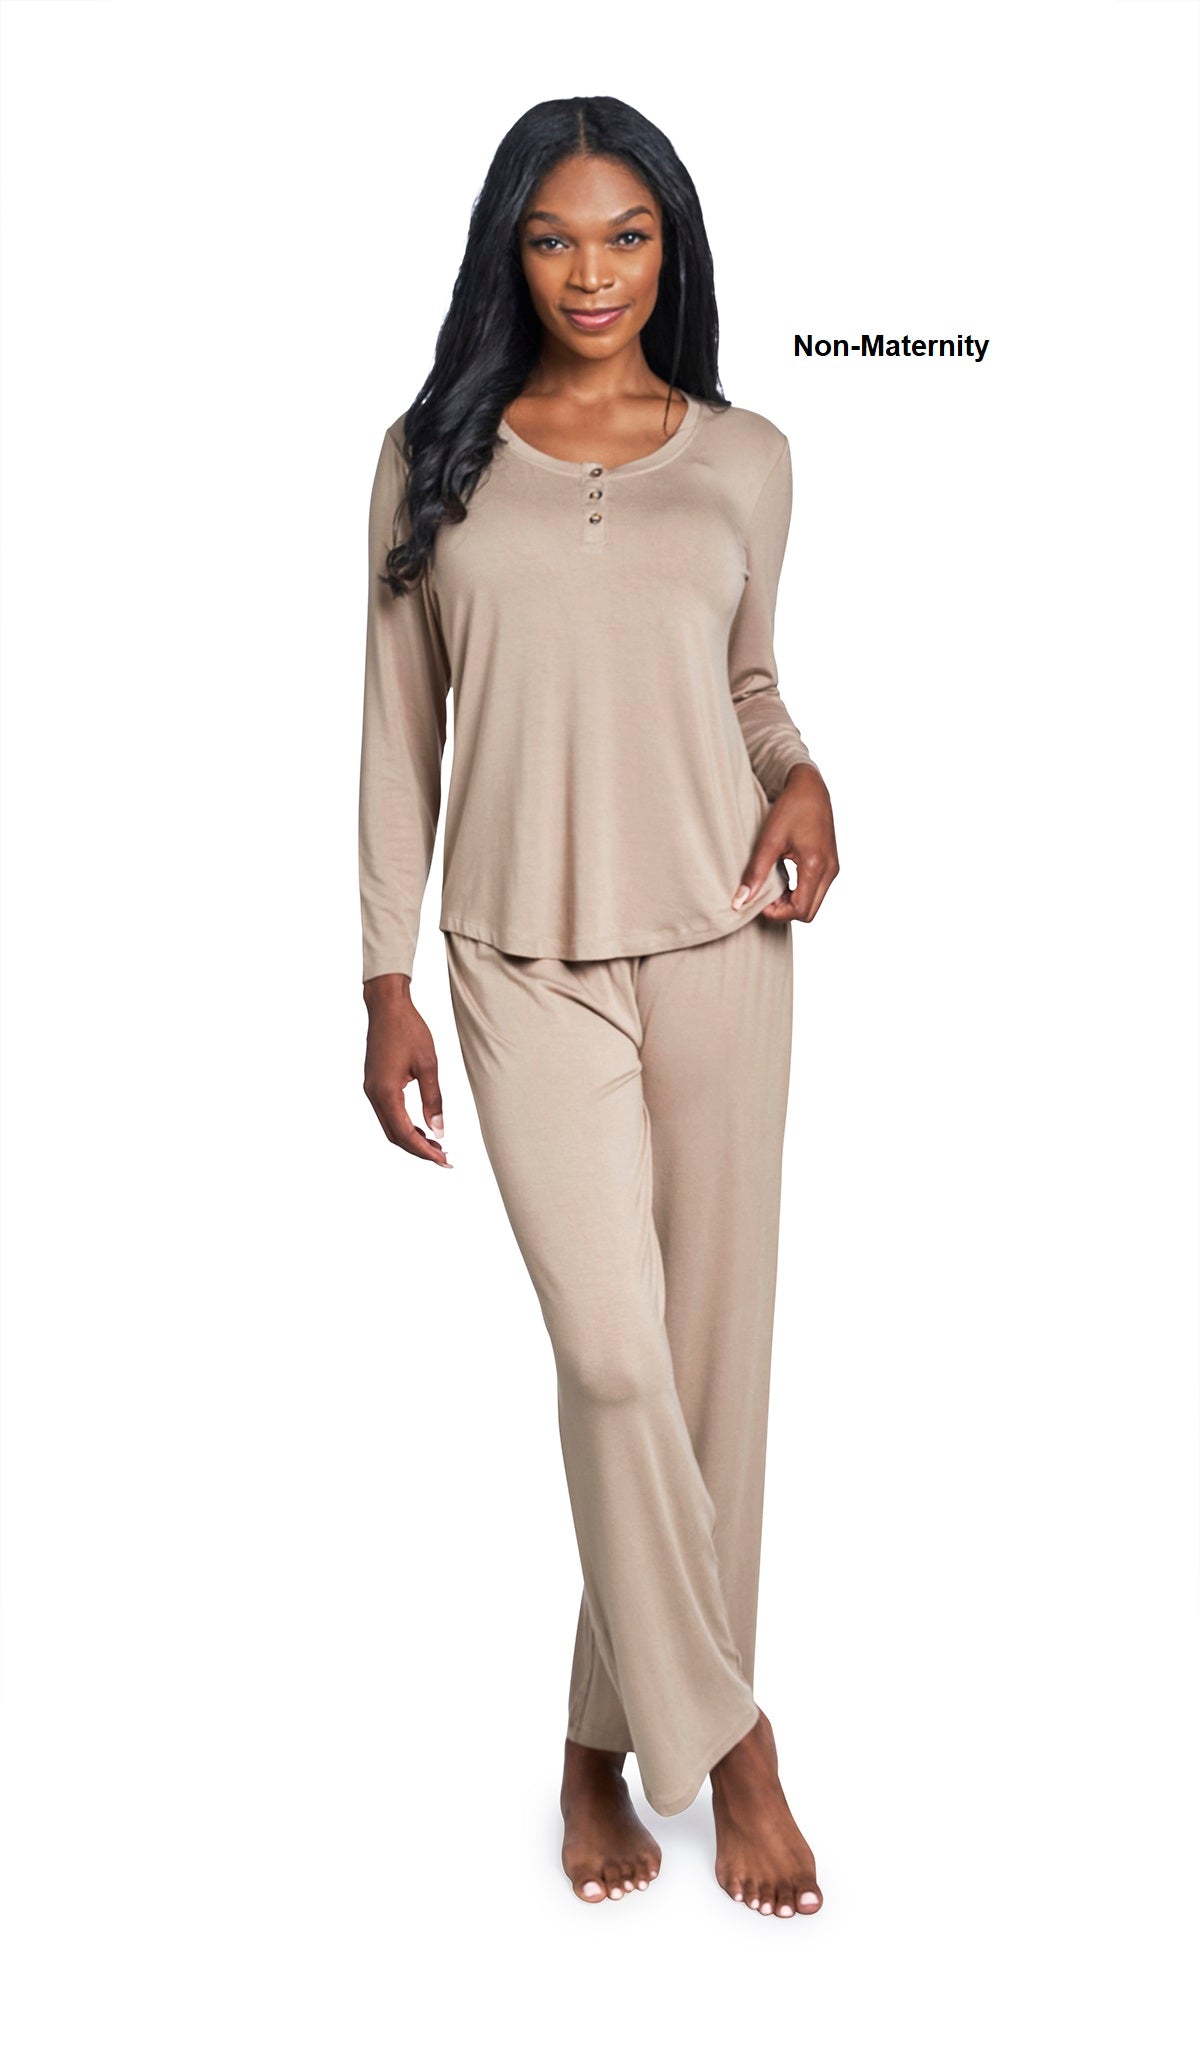 Latte Laina 2-Piece Set. Woman wearing button front placket long sleeve top and pant as non-maternity with one hand holding hem of shirt.